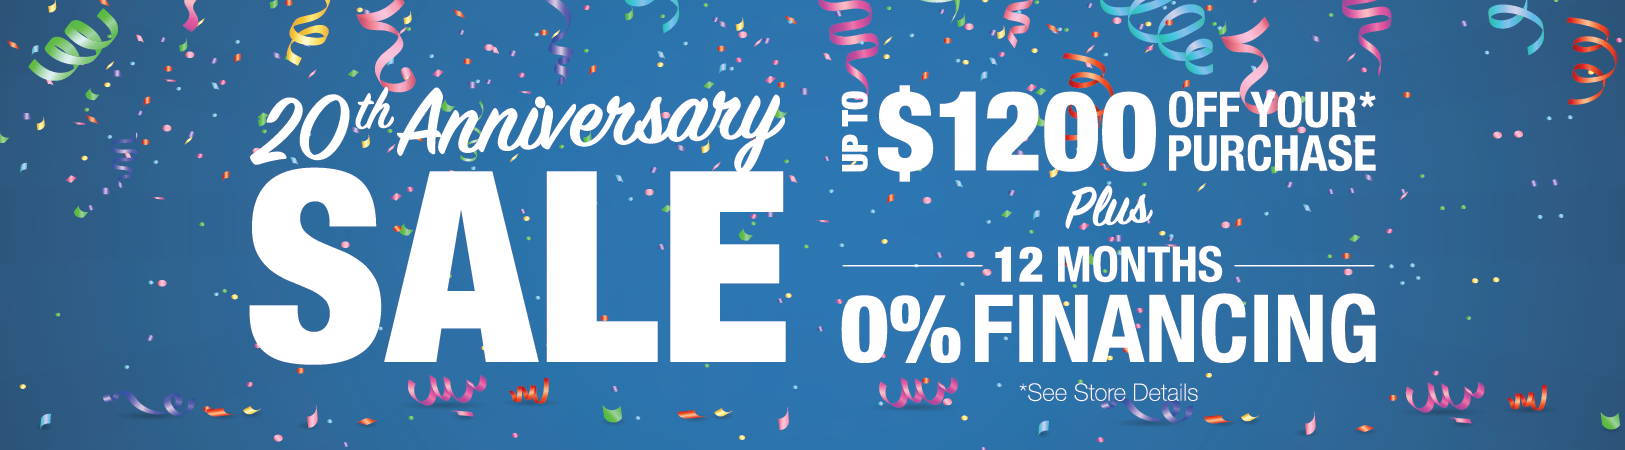 Top Fitness 20th Anniversary Sale